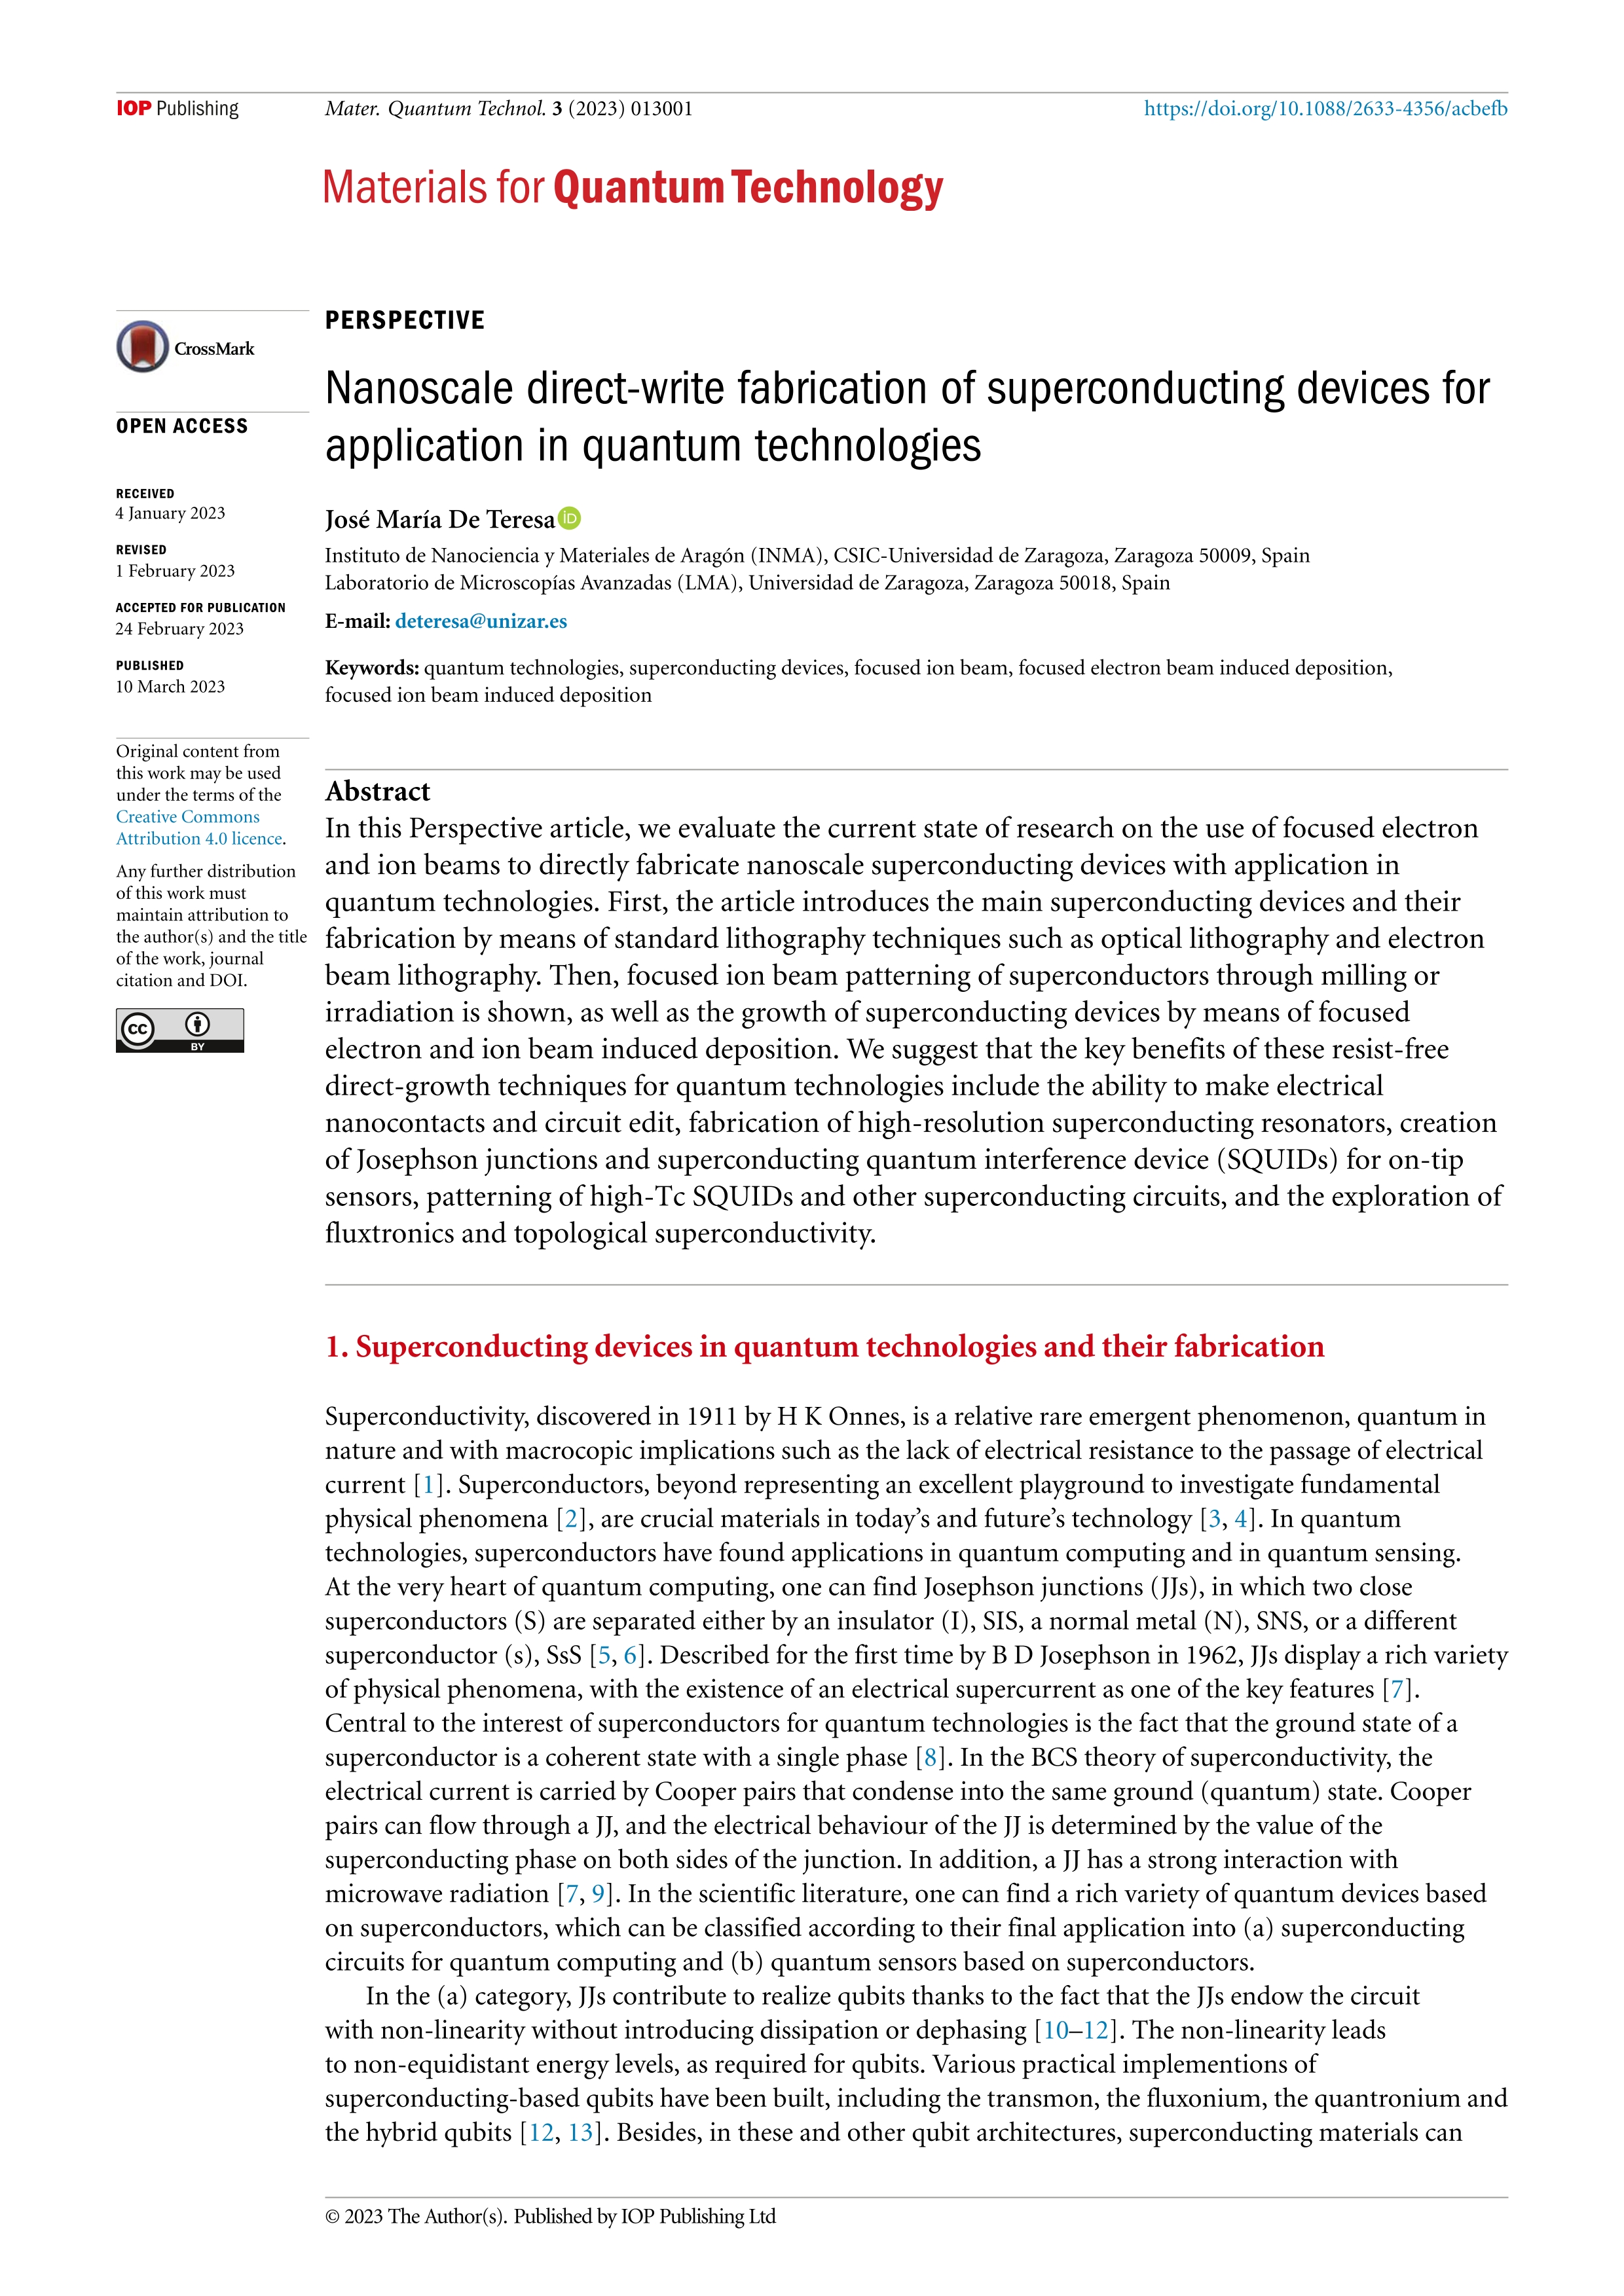 Nanoscale direct-write fabrication of superconducting devices for application in quantum technologies